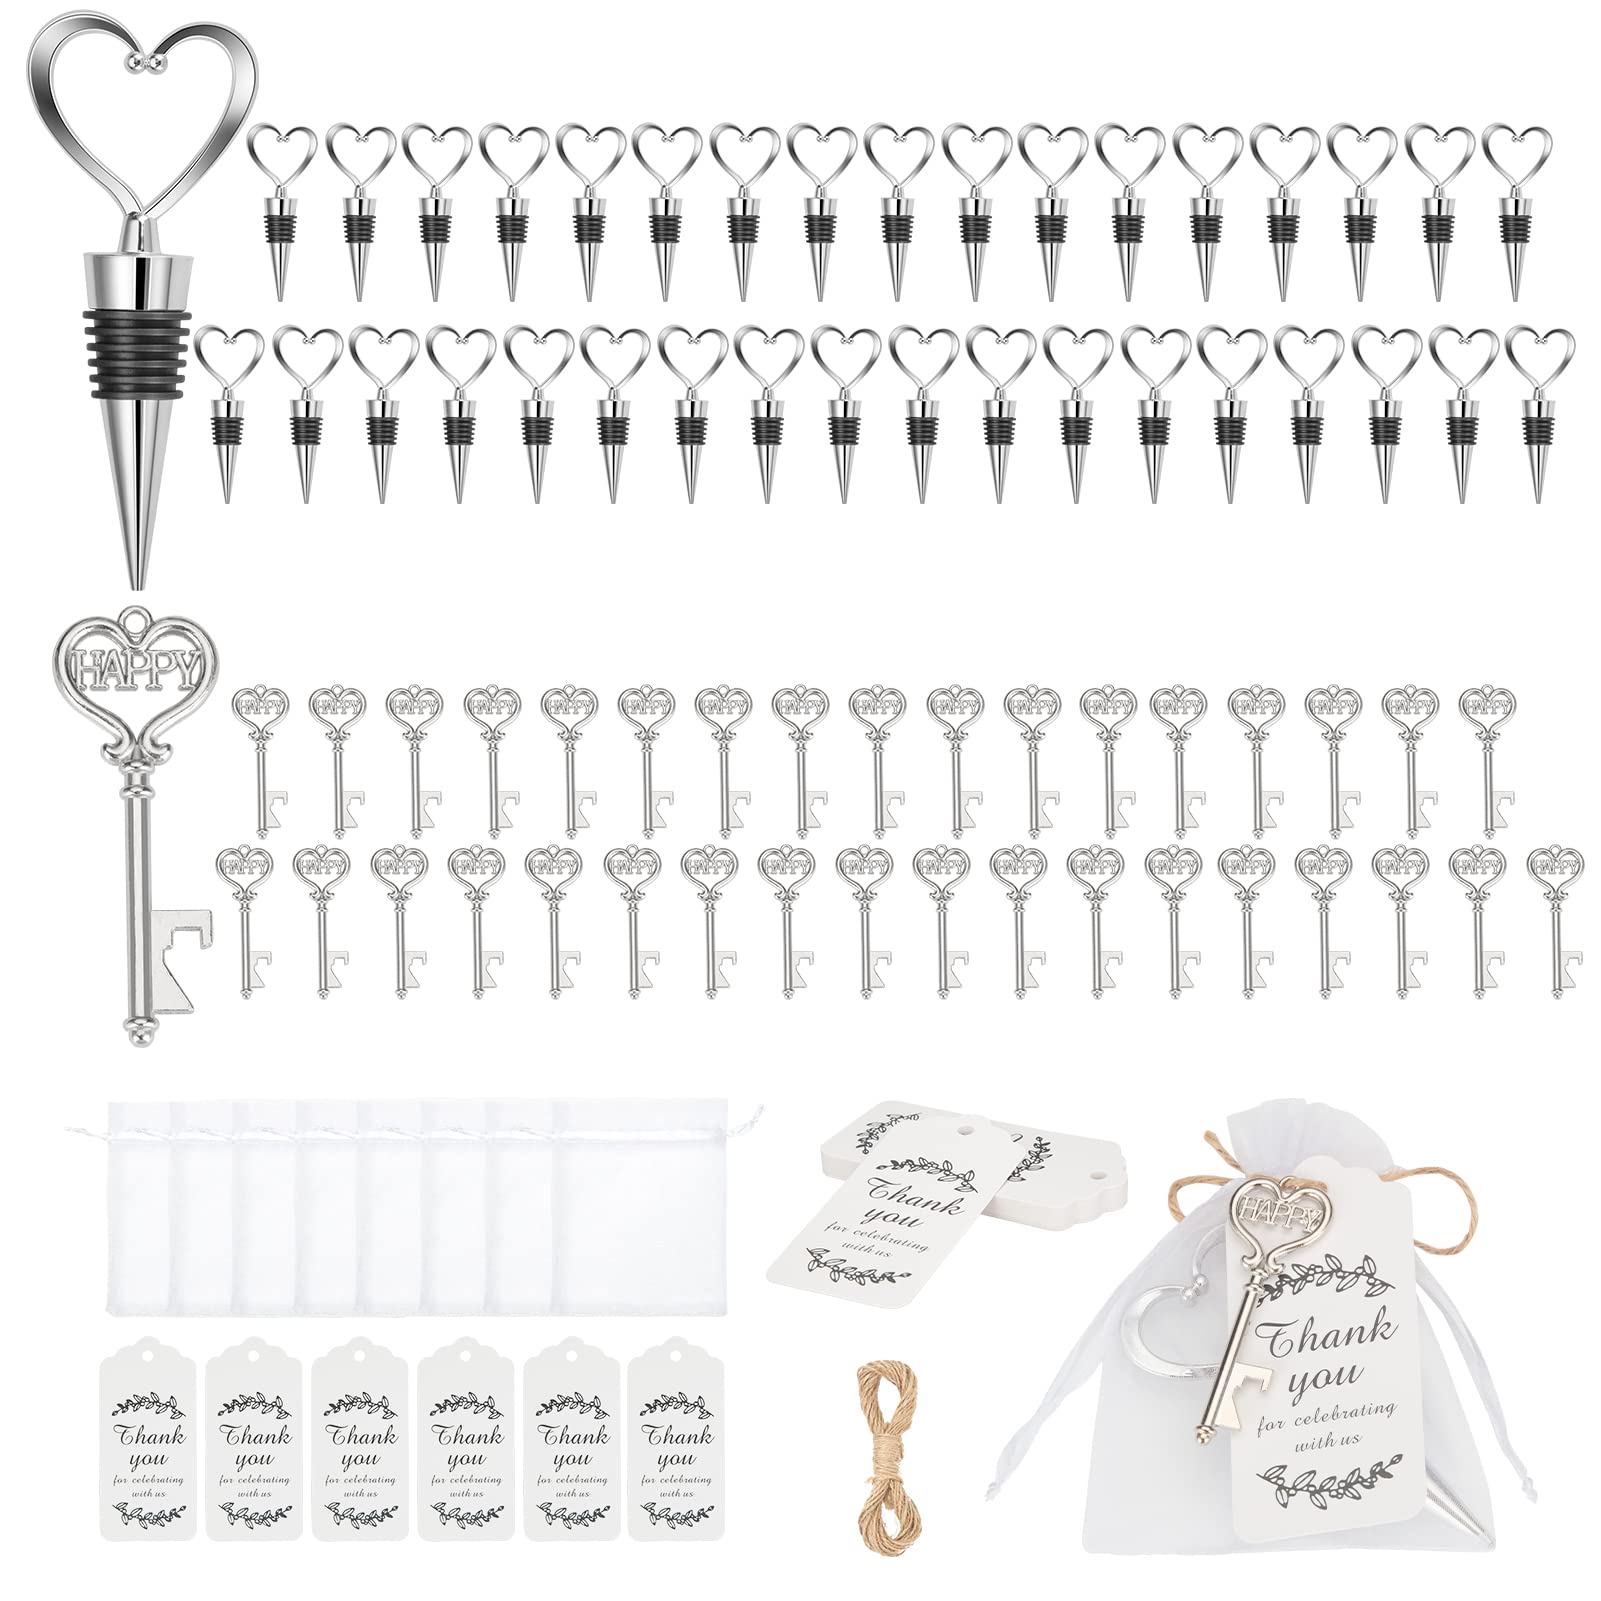 36 Pieces Heart Shape Wine Stopper Wedding Bridal Favor for Guests, with 36 Pieces Wine Bottle Opener, Wedding Favors for Guests